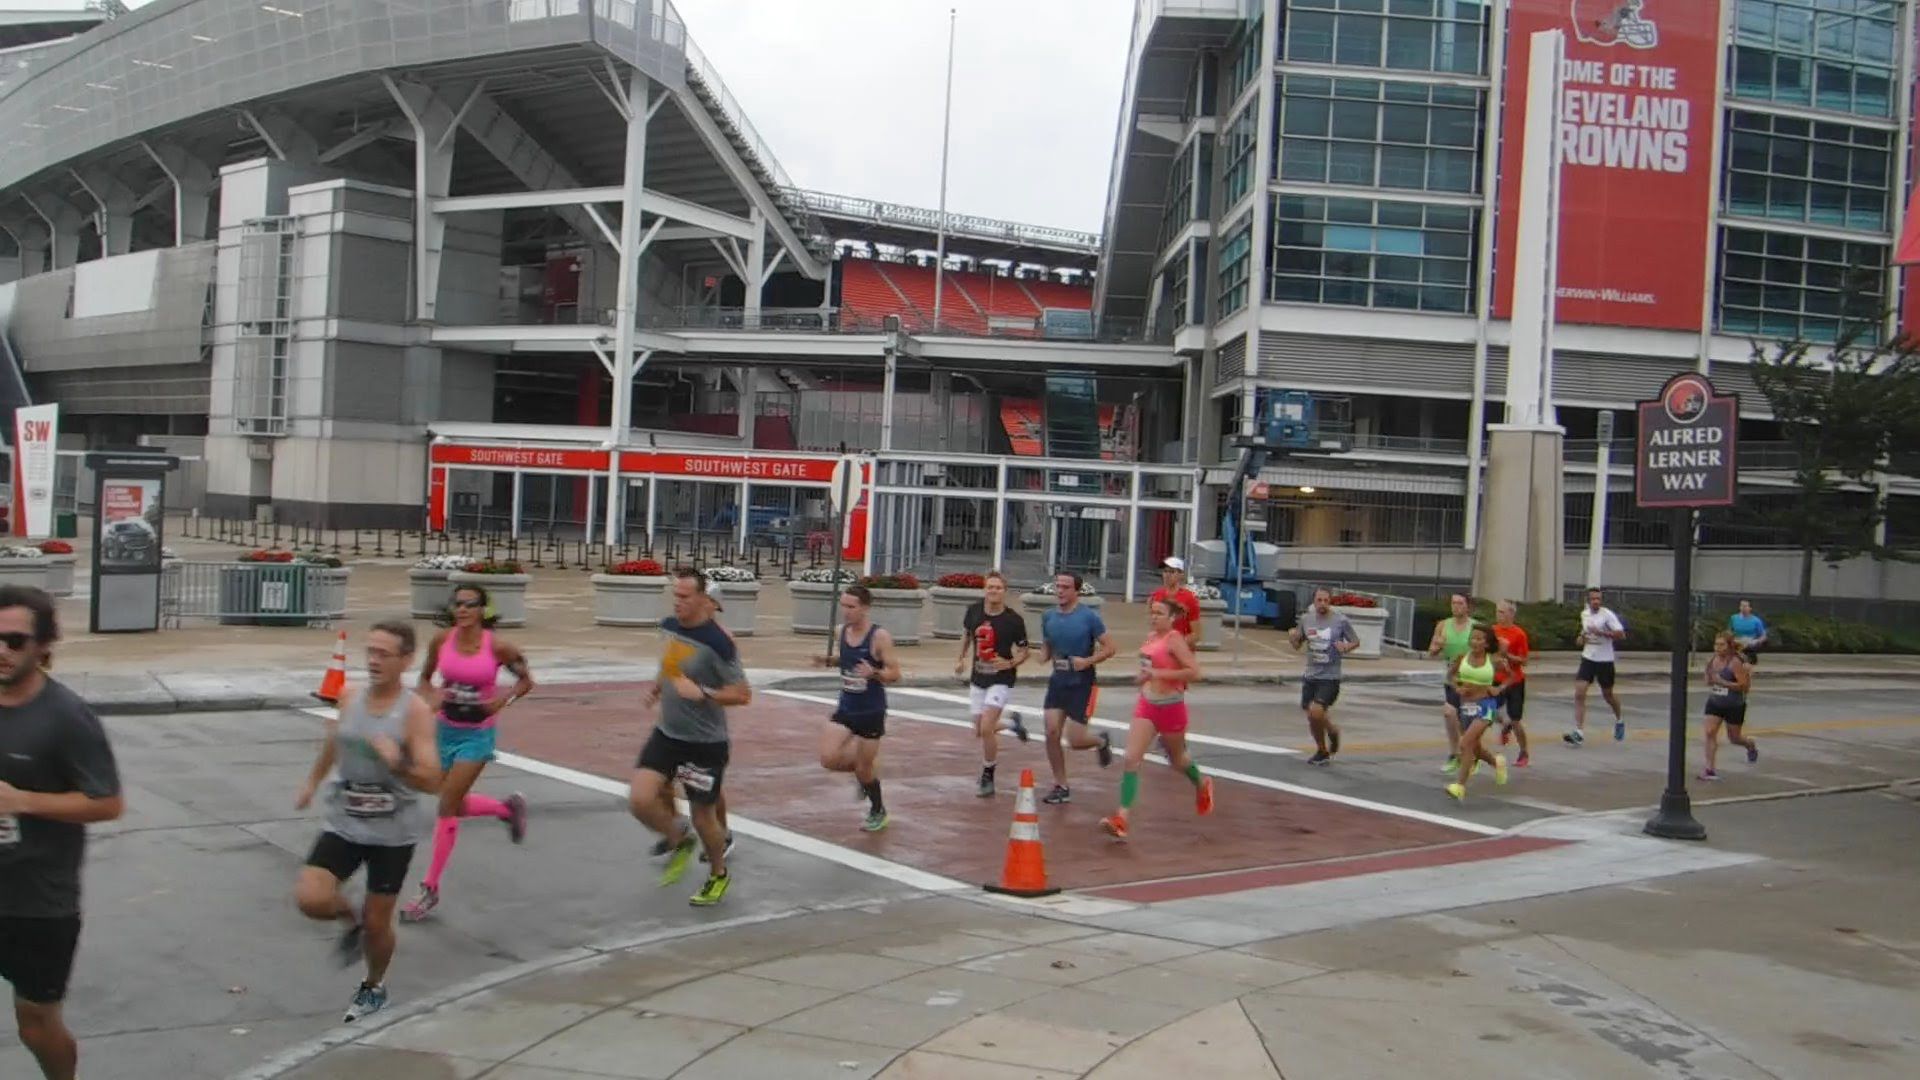 Half-Marathon at Rock & Roll Hall of Fame in CLE in 2016